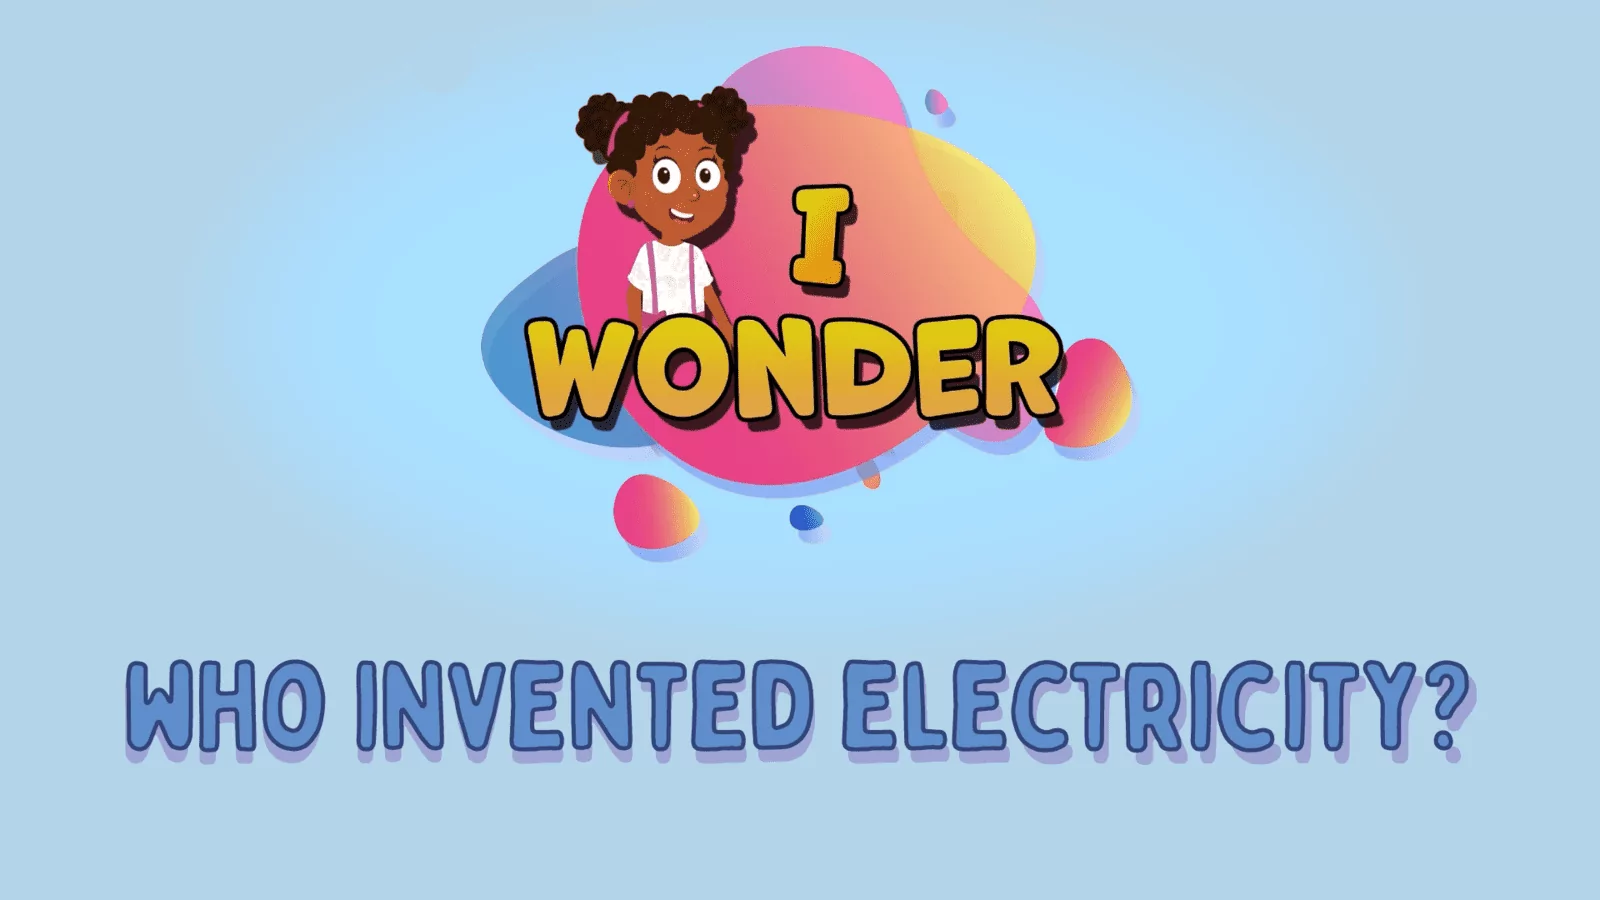 Who Invented Electricity?